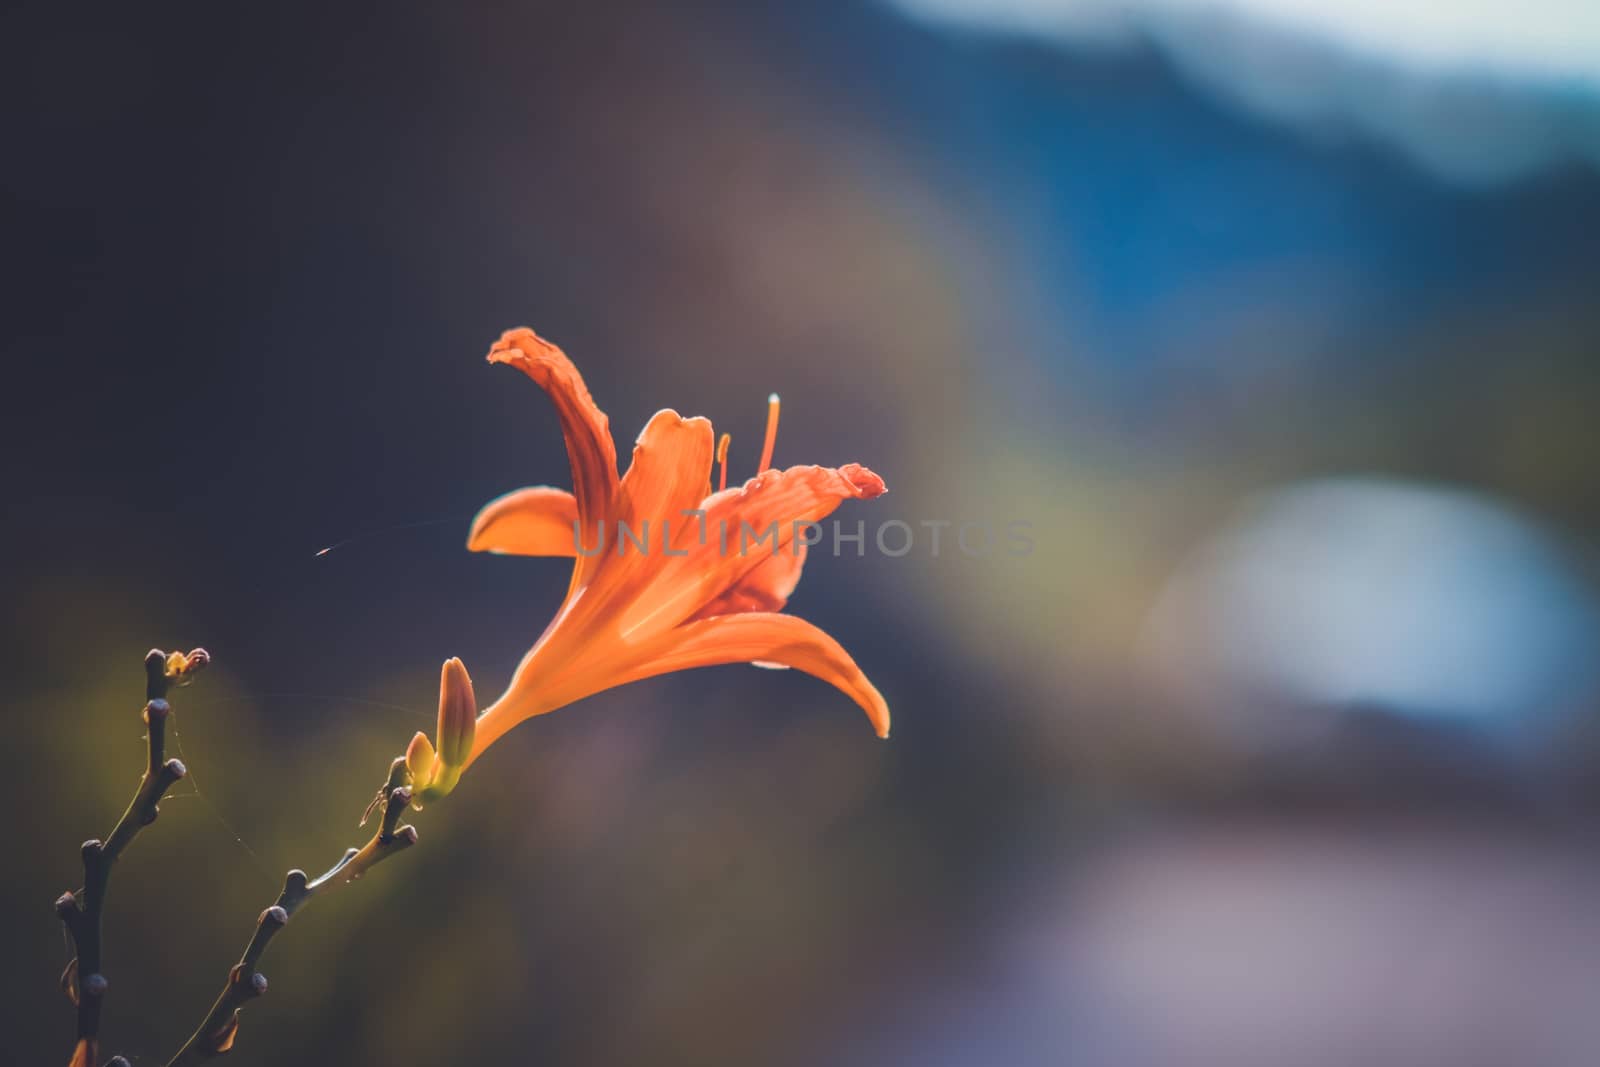 Orange flower over blurred blue and purple tones background in M by mikelju